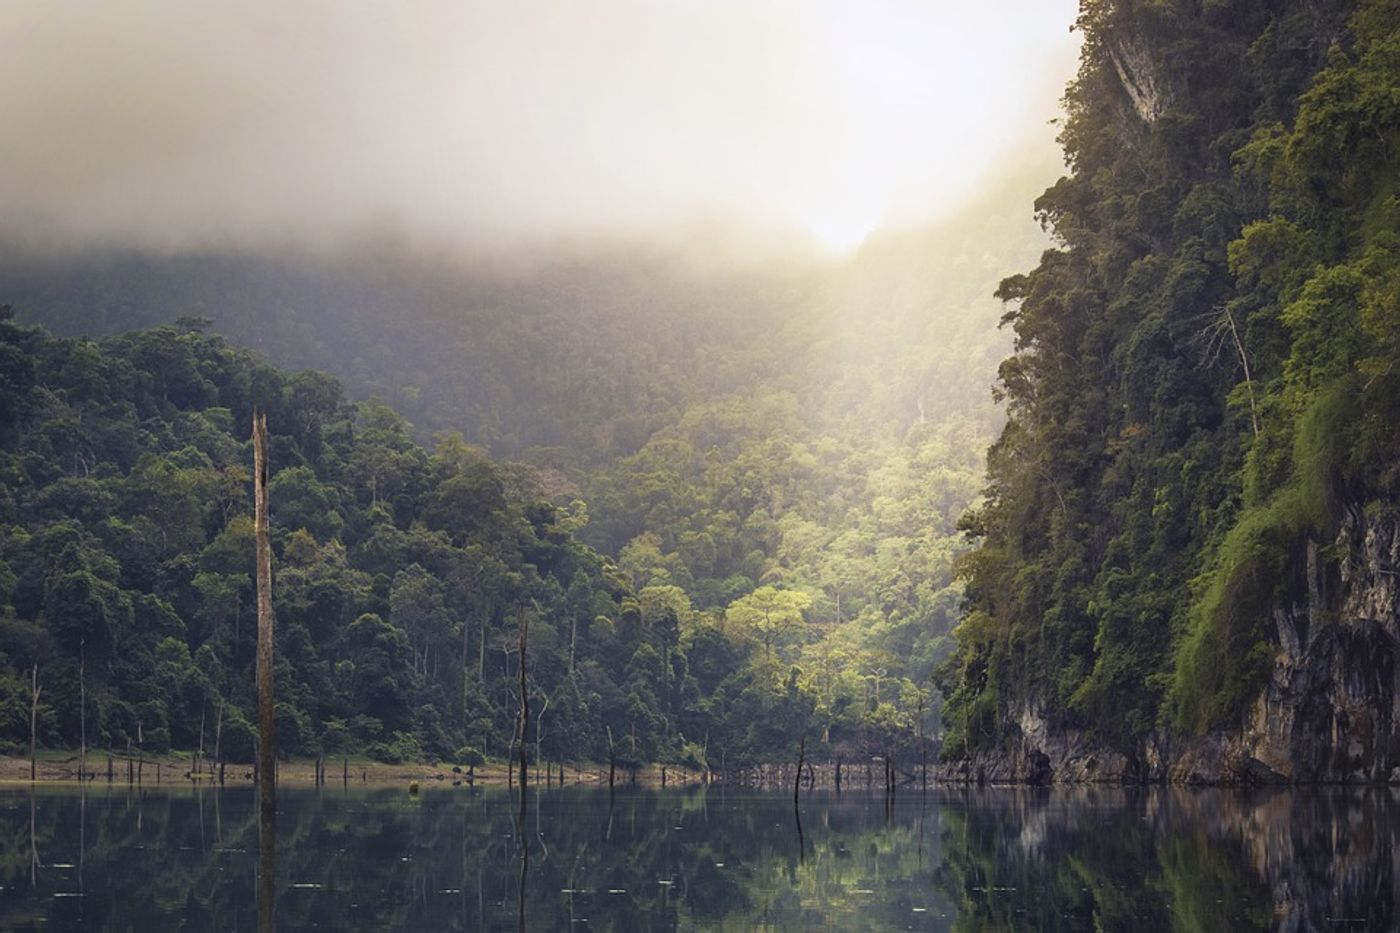 This new method provides detailed information about carbon emissions in Peru's rain forest. Photo: Pixabay